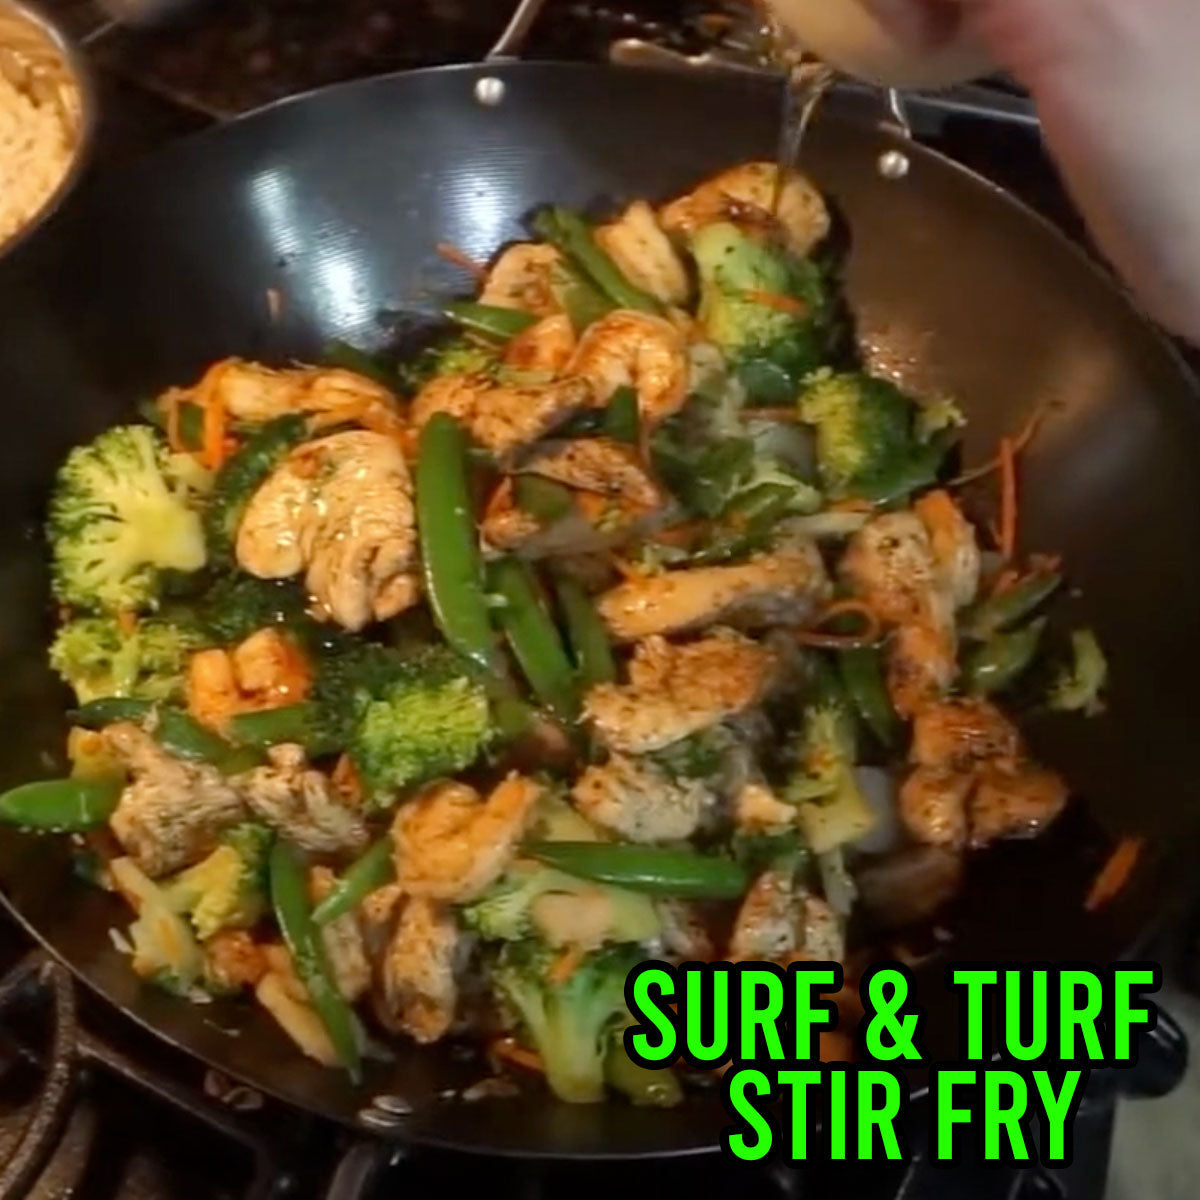 Surf & Turf Stir Fry (Chicken and Shrimp) Healthy Dish! | Grill Your Ass Off